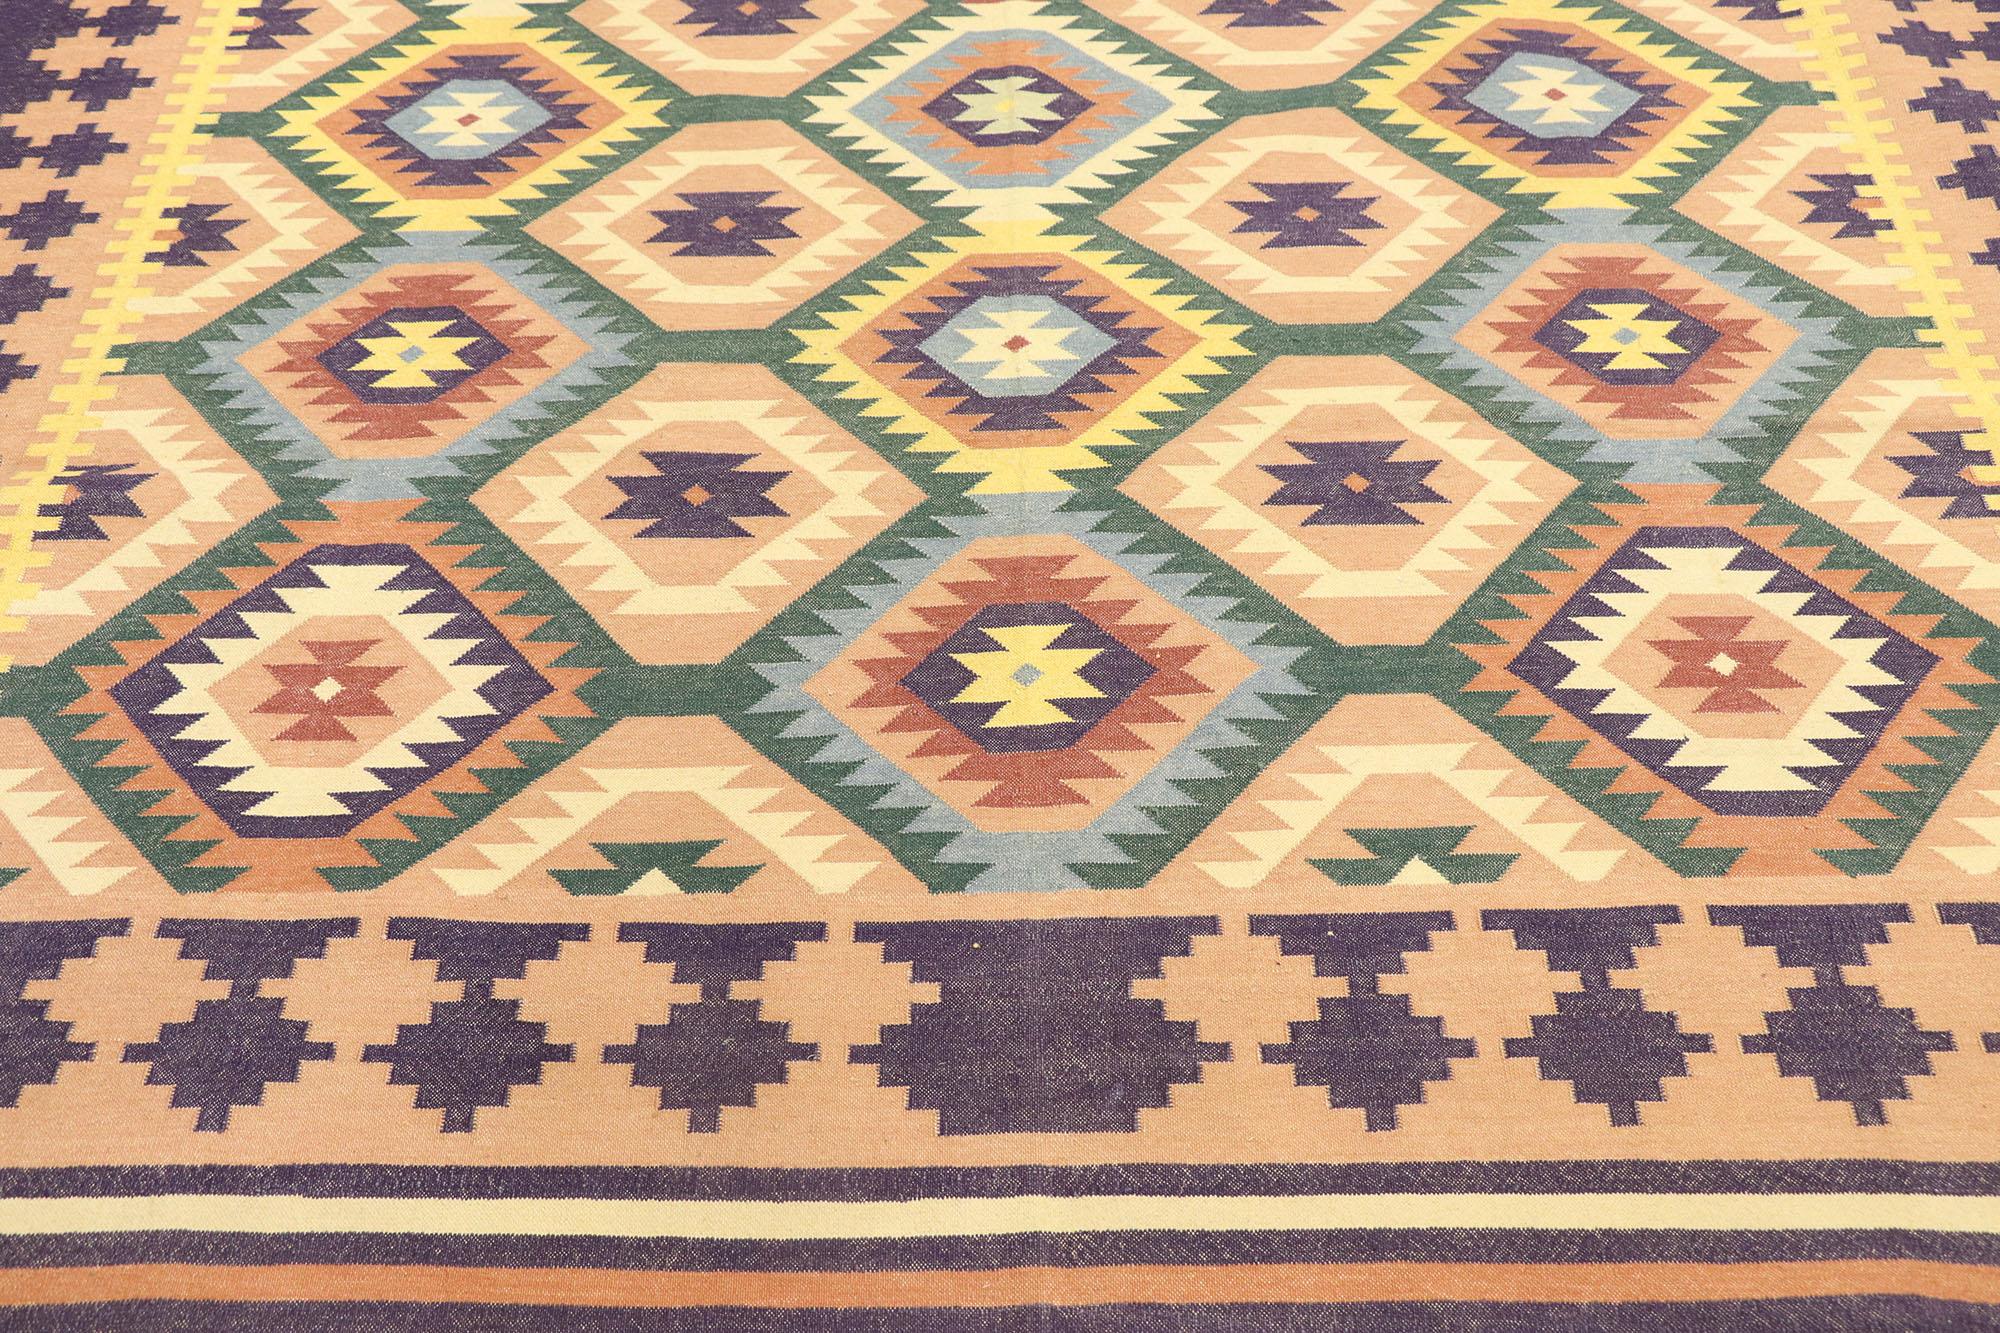 Vintage Afghan Maimana Kilim Rug with Southwestern Tribal Style In Good Condition For Sale In Dallas, TX